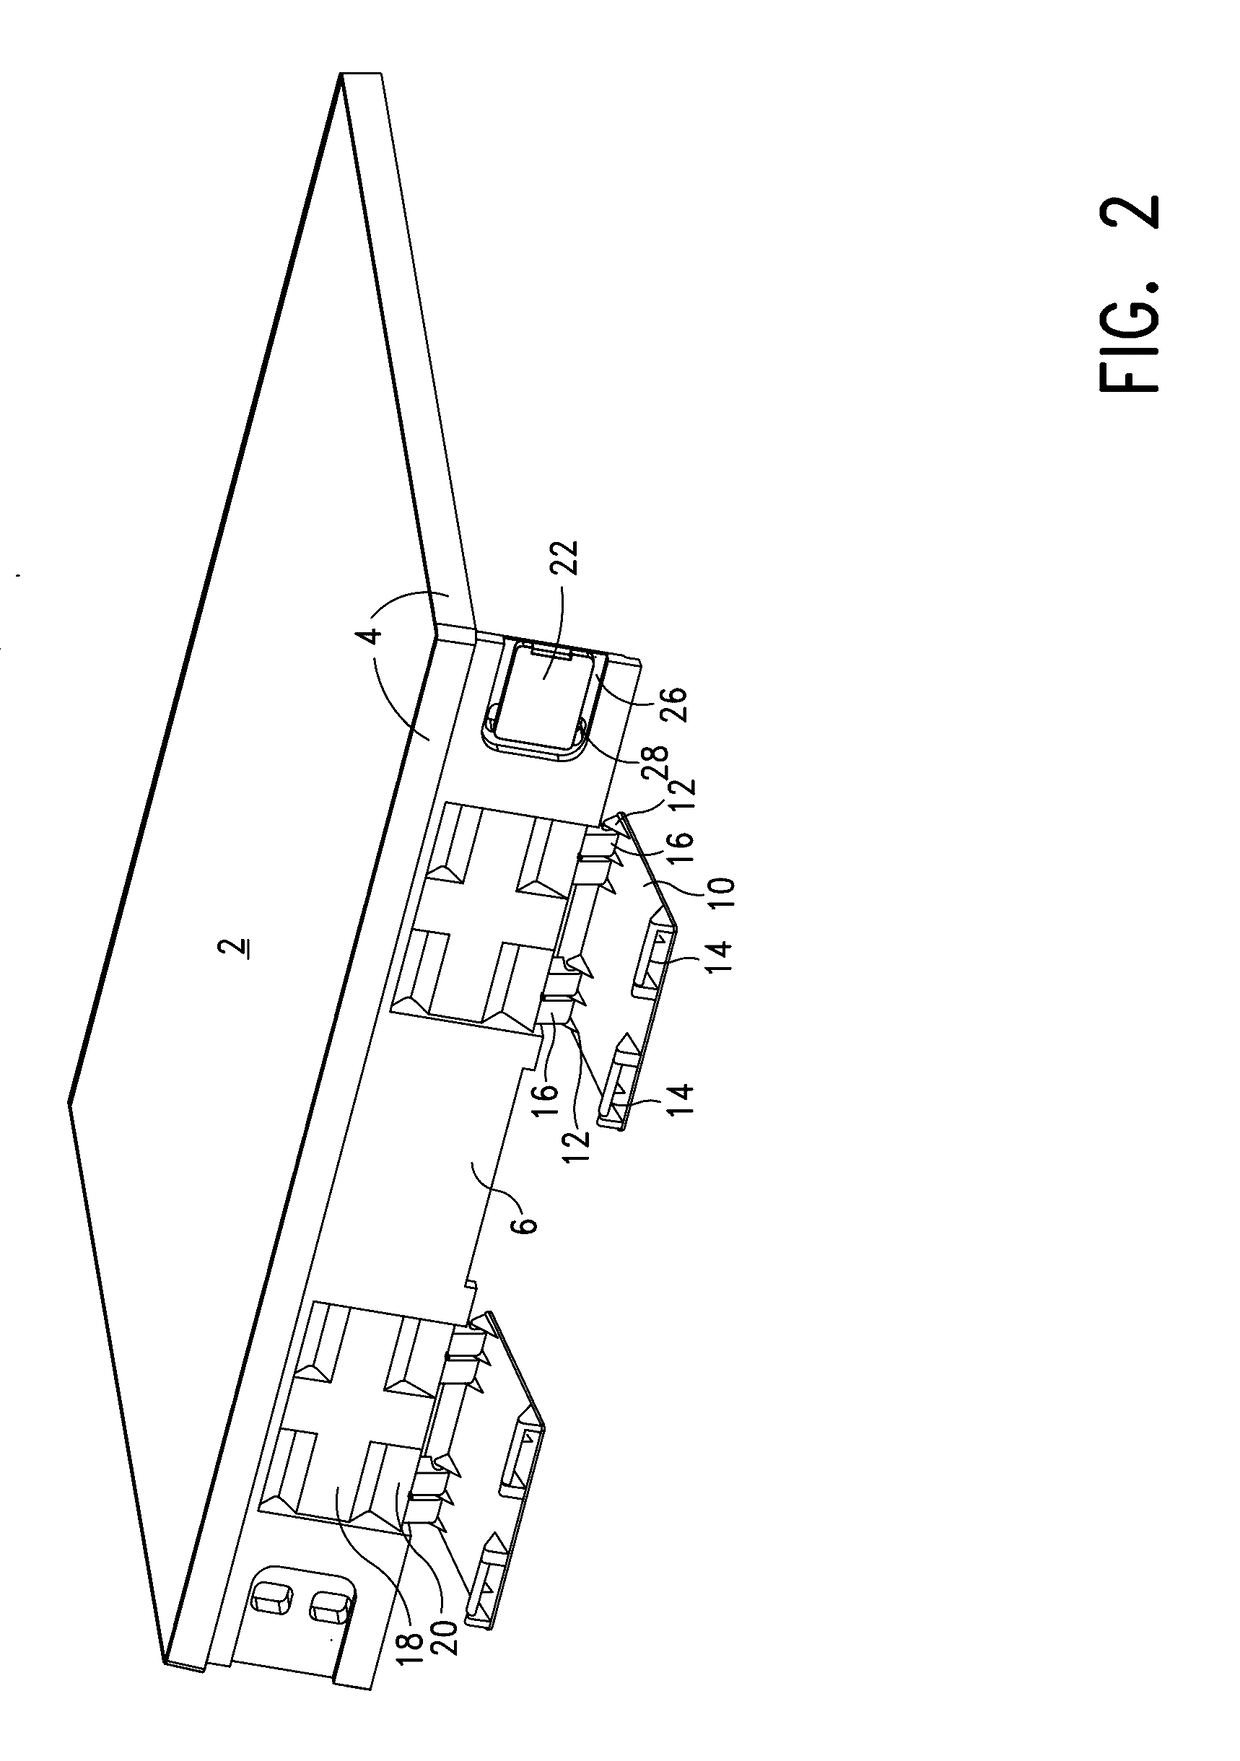 Photovoltaic module mounting and installation system